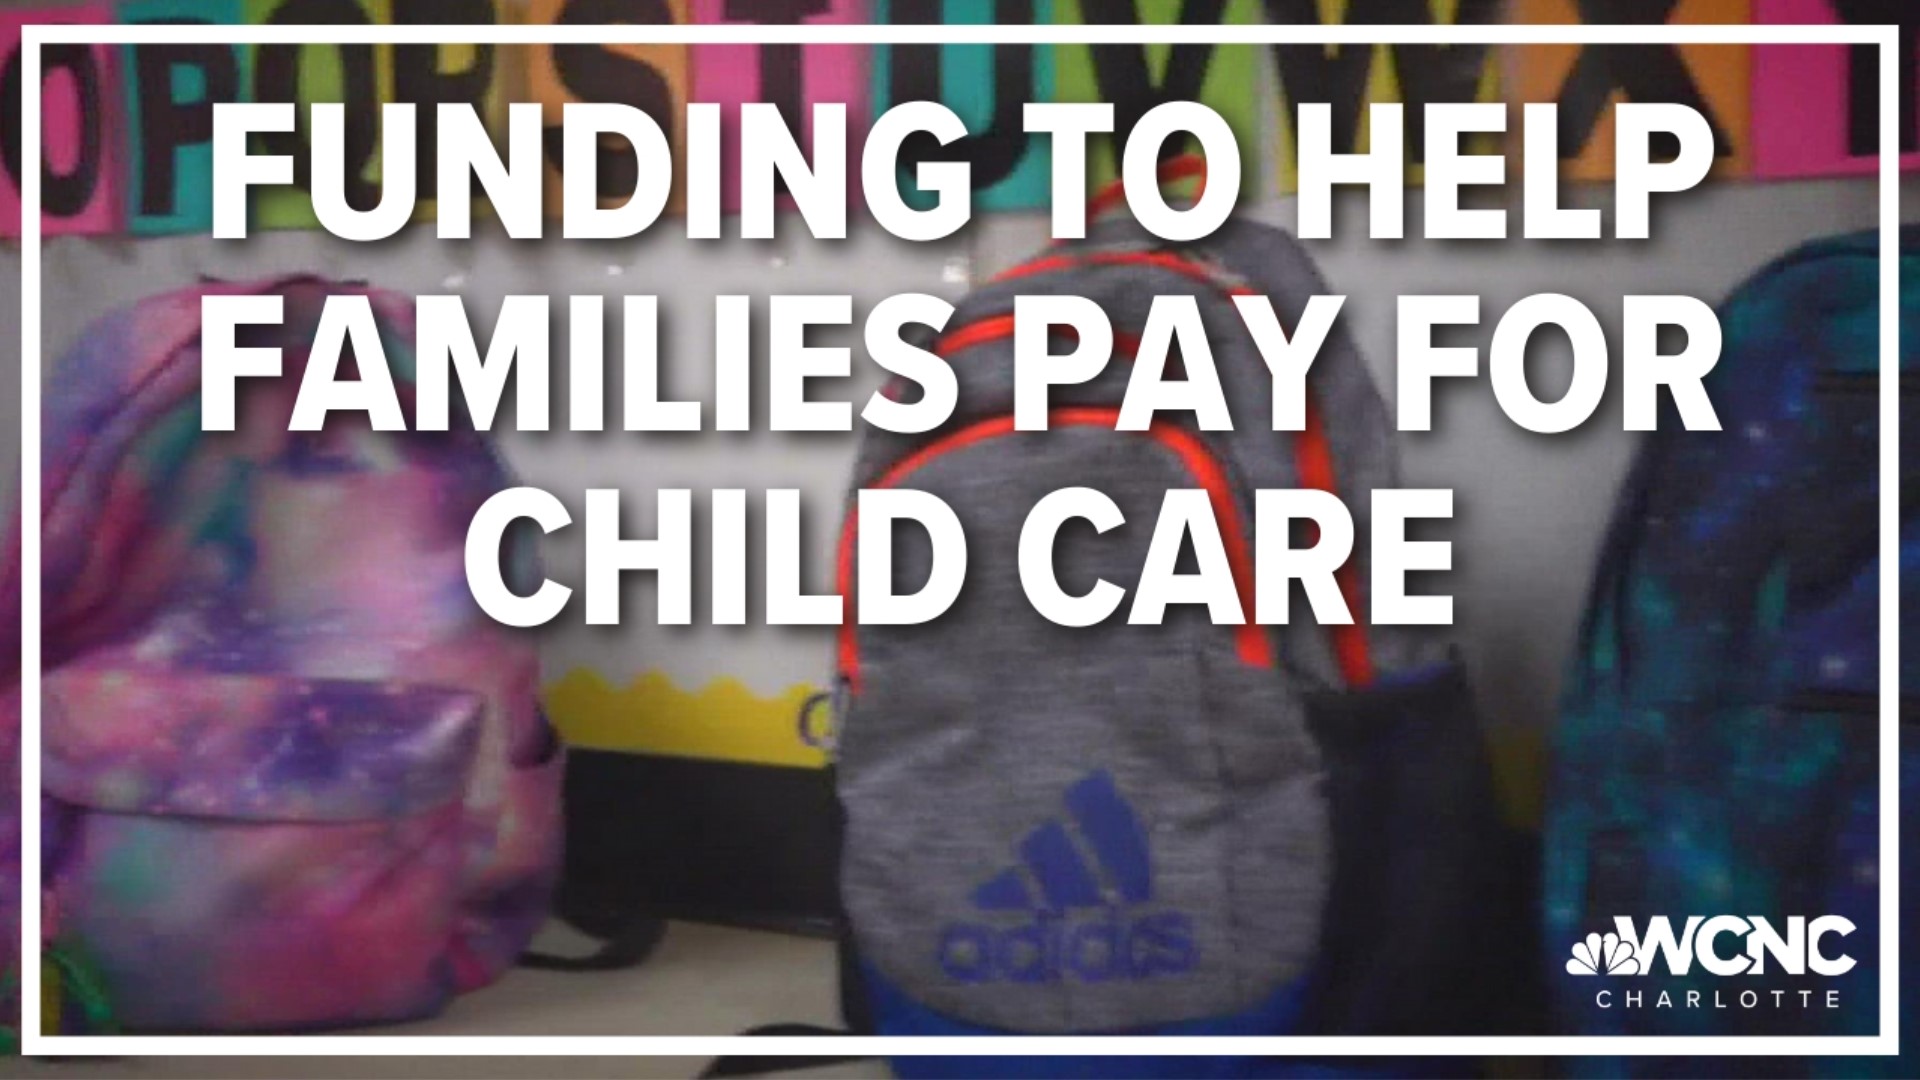 If you're in Mecklenburg County and struggling to afford child care, count leaders hope new funding can help lighten your load.